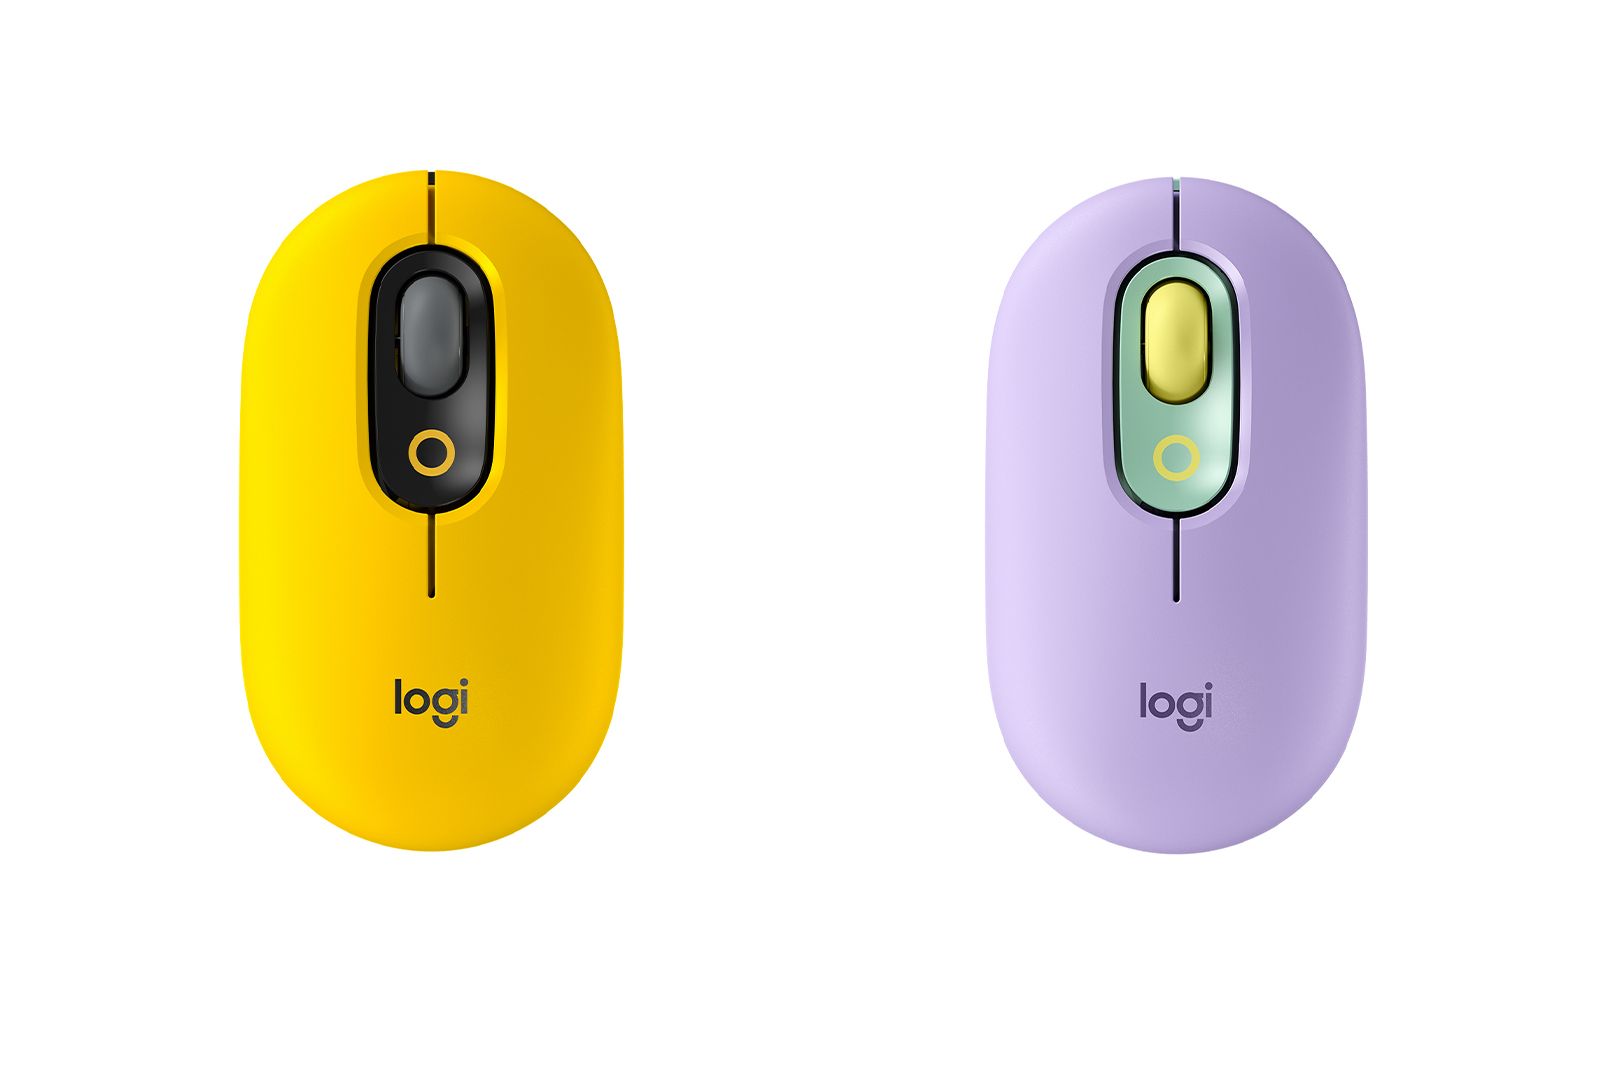 Logitech's range of colourful keyboards and mouse are designed for the social media generation photo 5